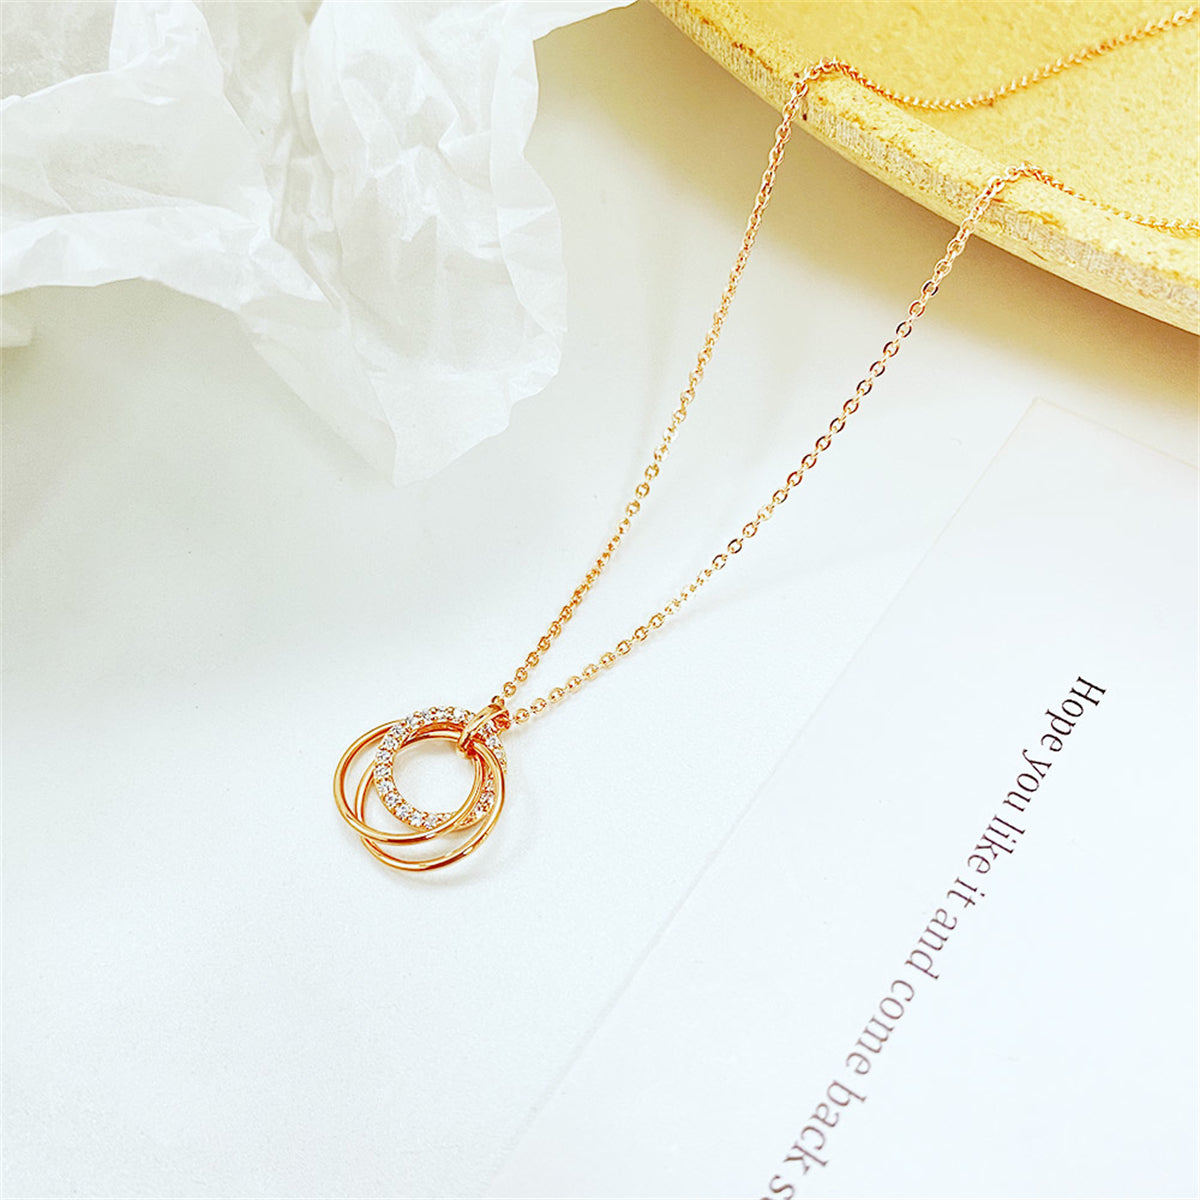 Cubic Zirconia & 18K Rose Gold-Plated Intertwined Circular Pendant Necklace